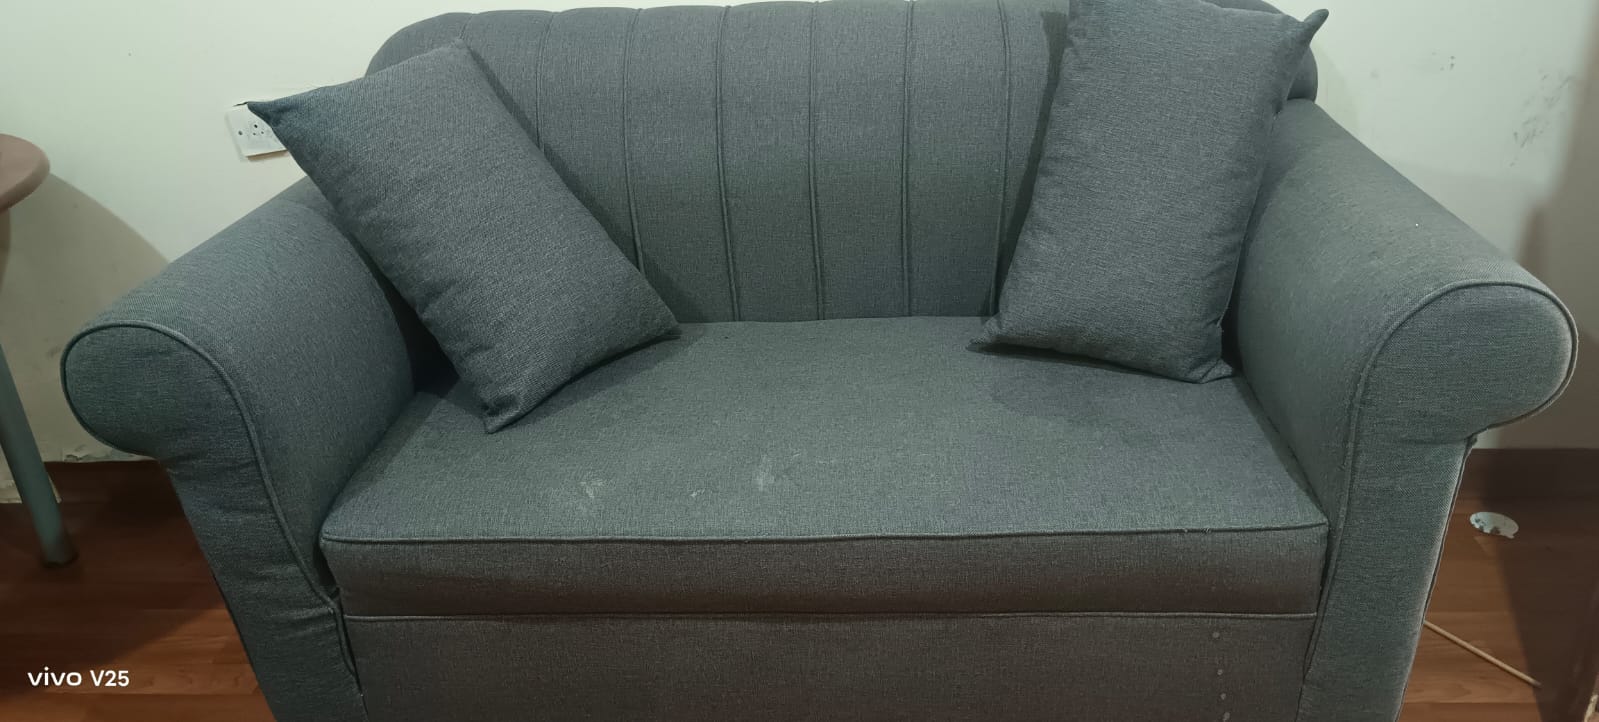 Sofa and bed for sale - Throw away price